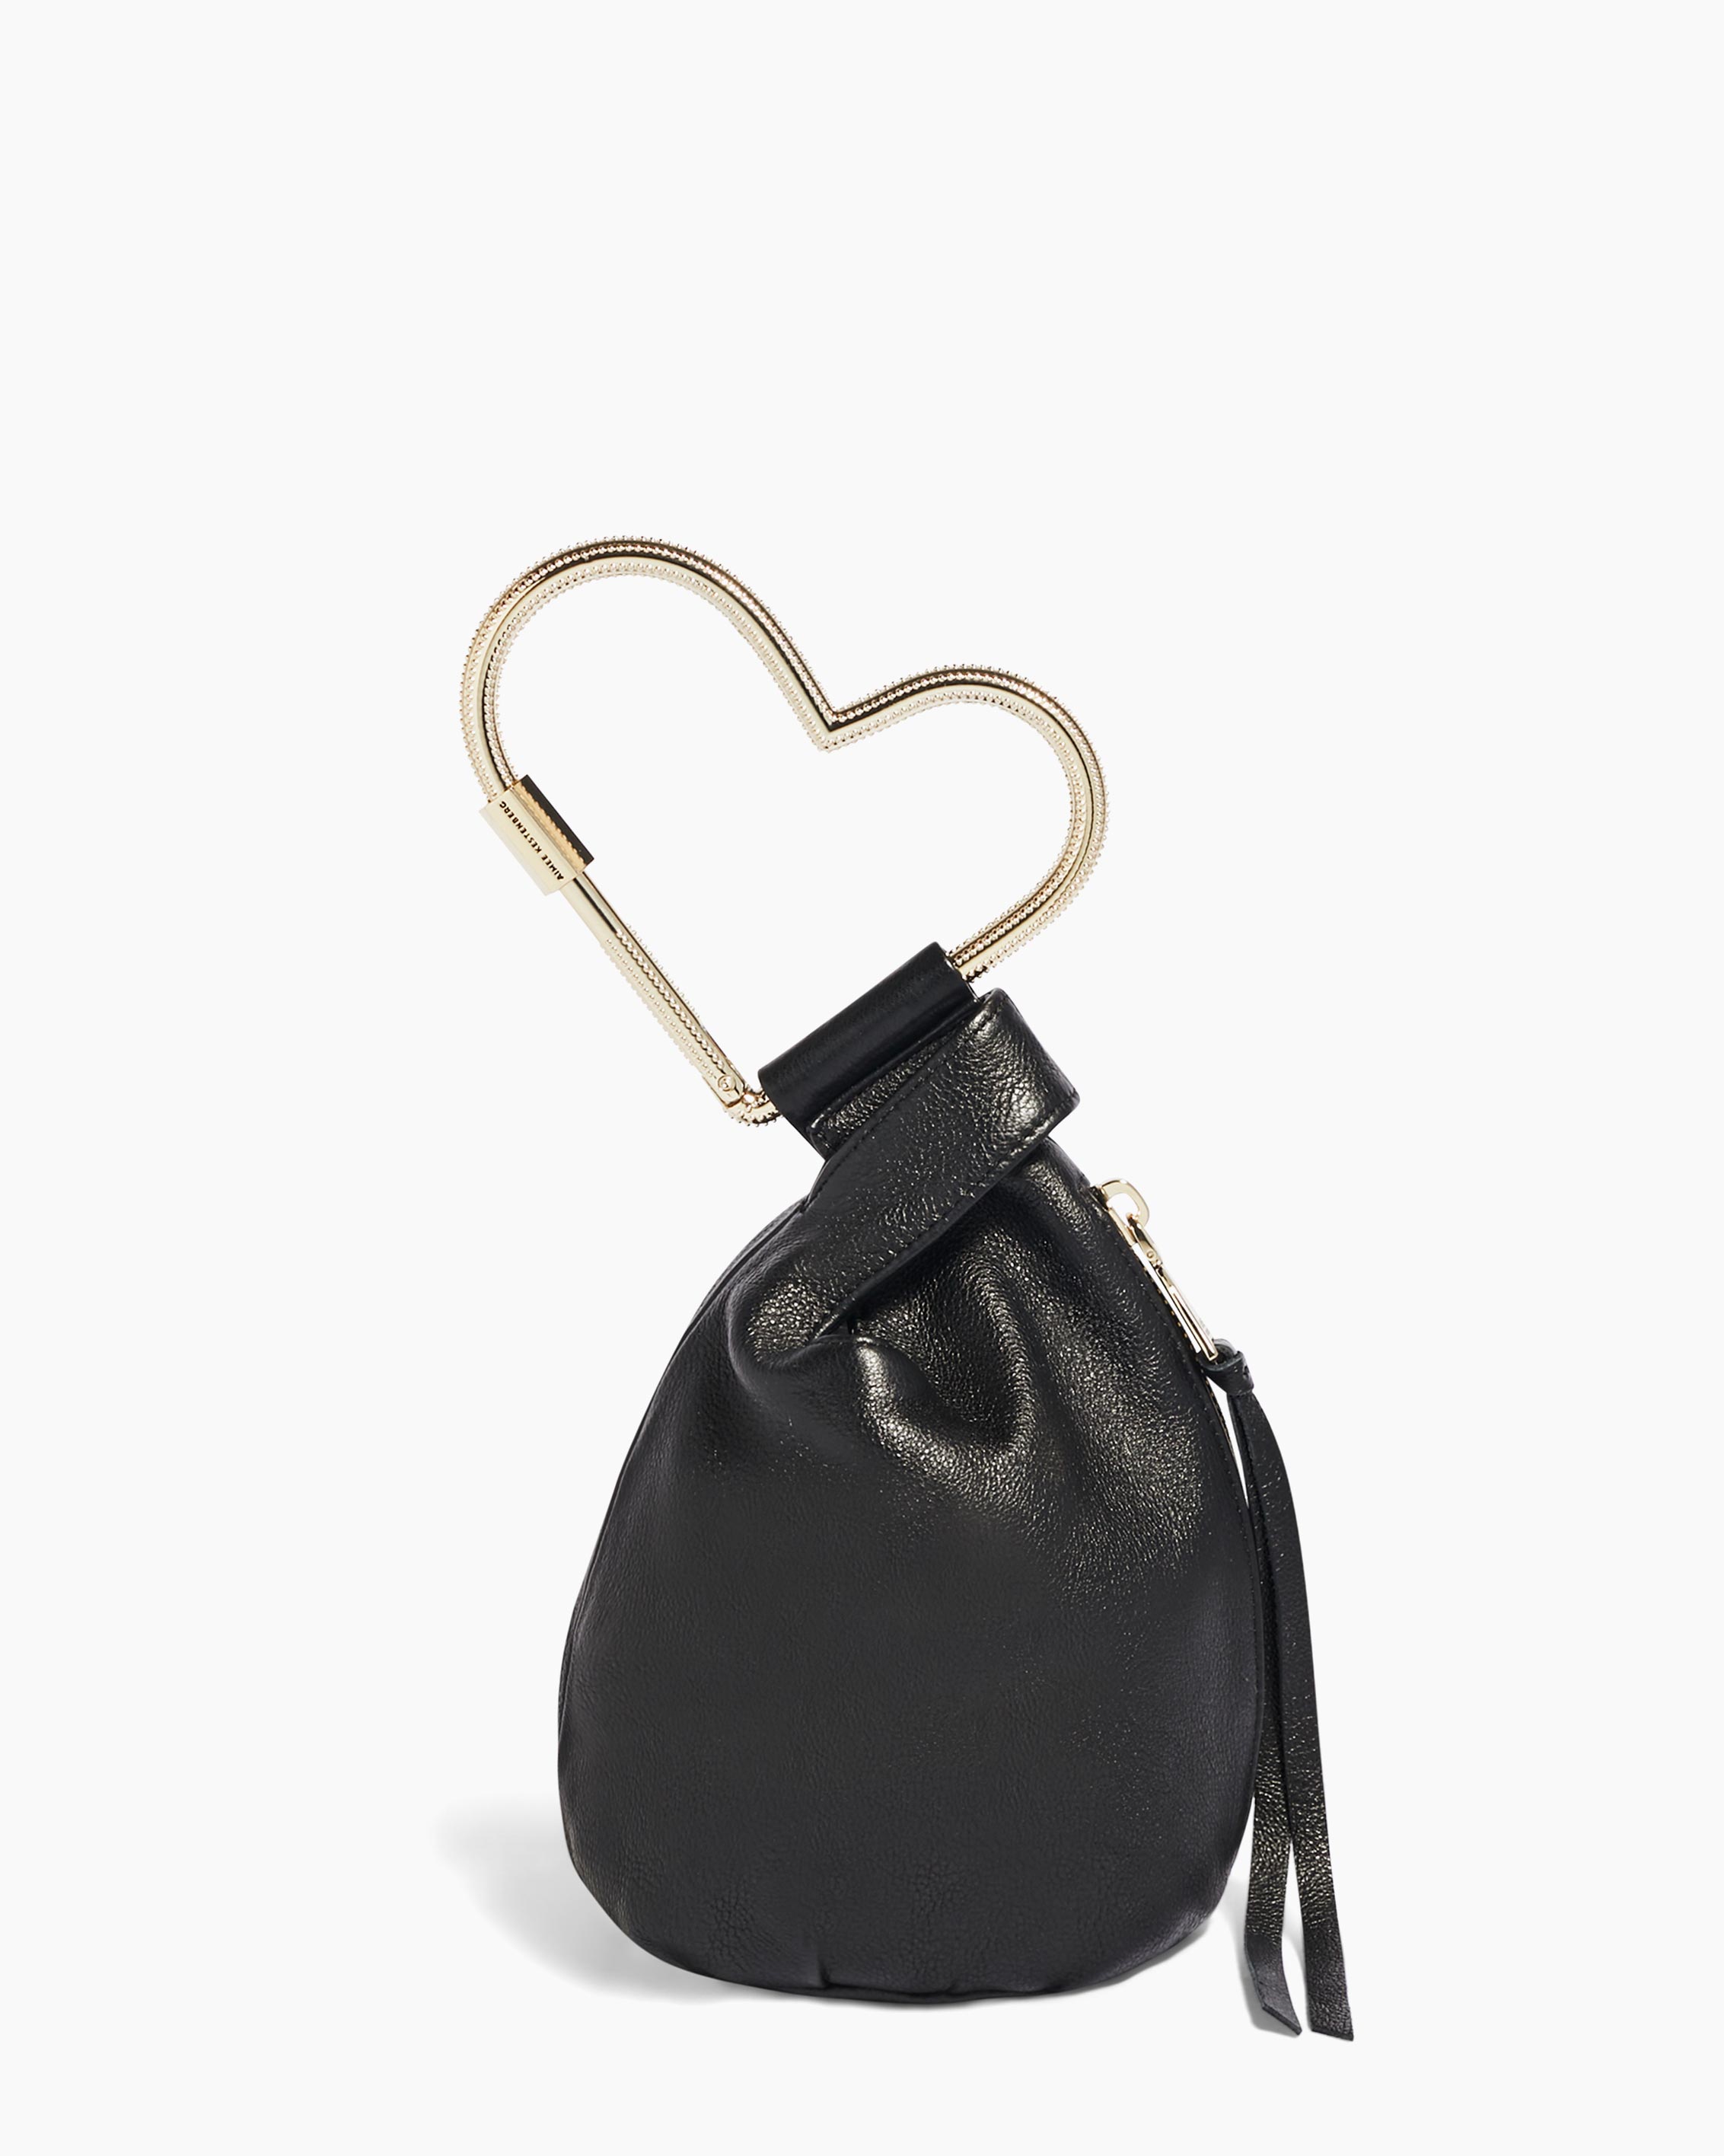 Tote Bag and Mini Heart Pouch Set - Black/Gold